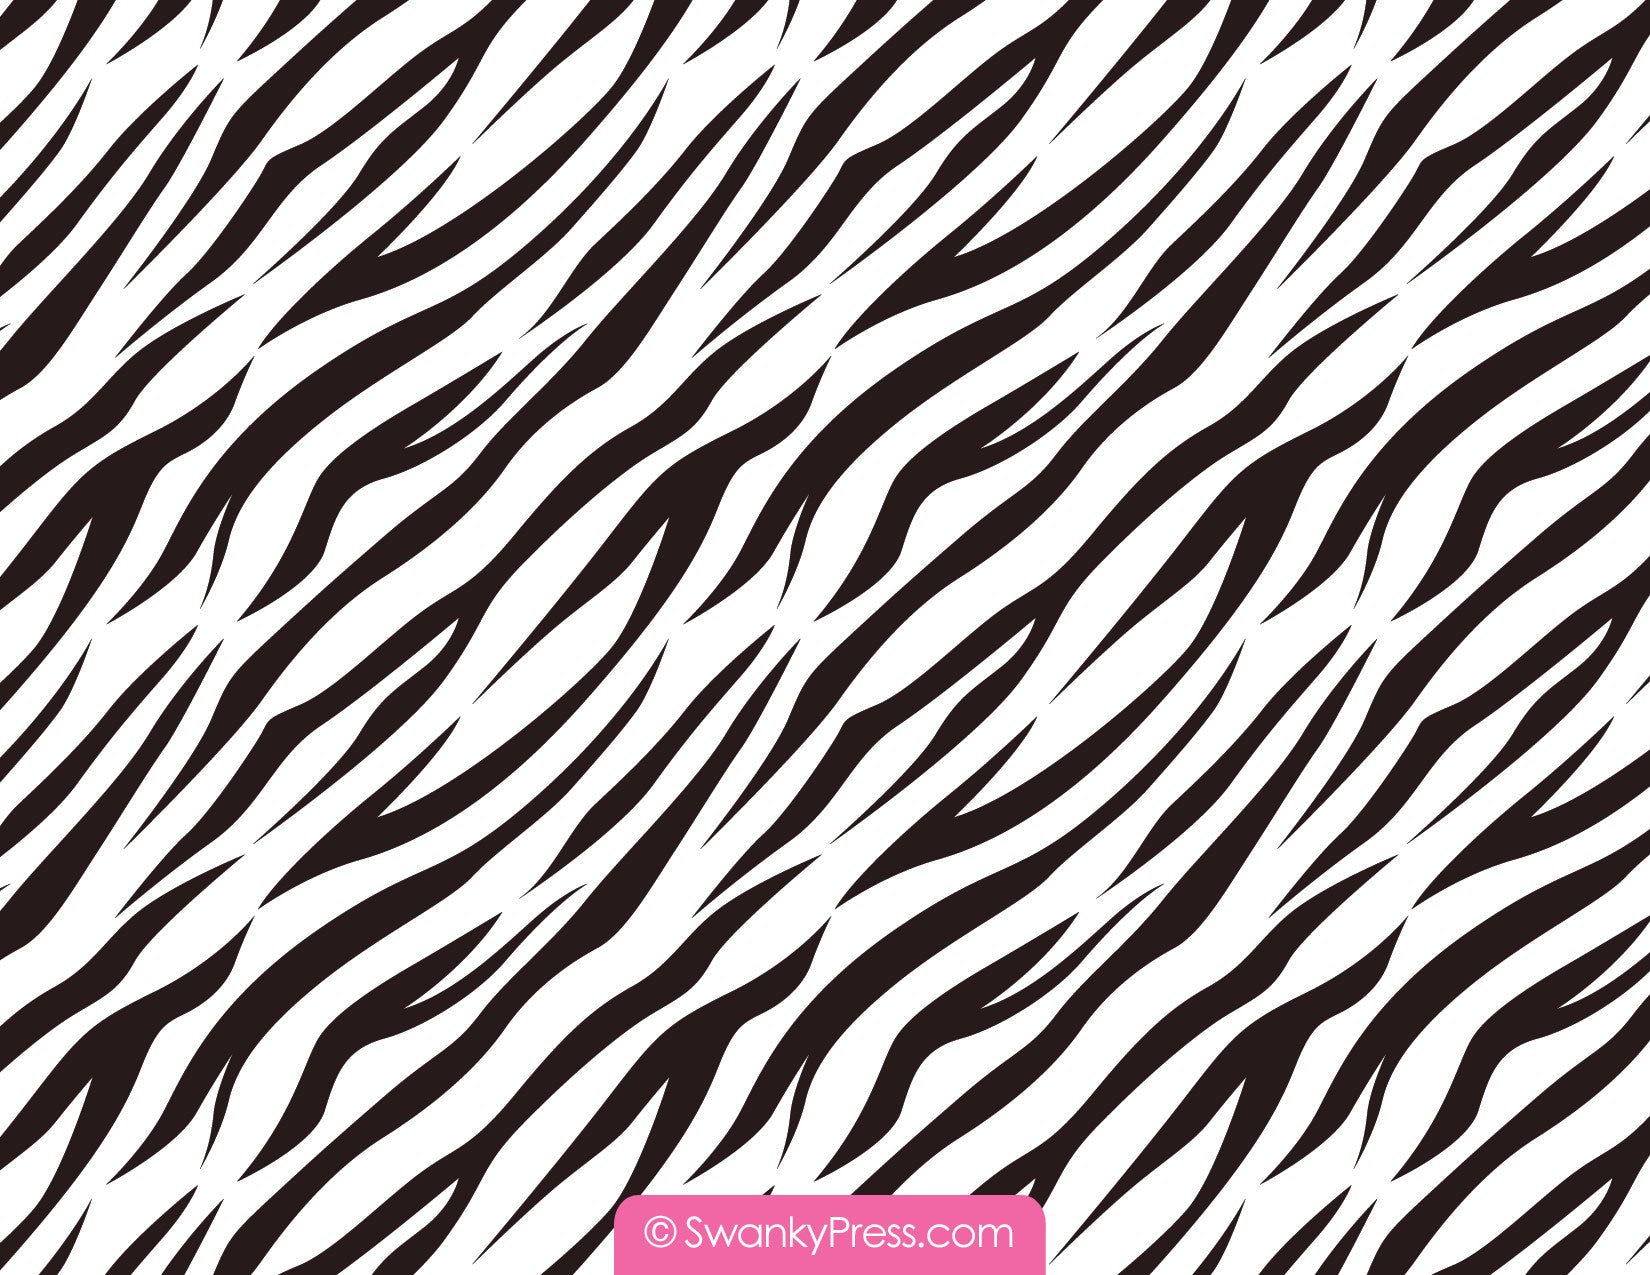 Spa thank you notes in hot pink with zebra stripes